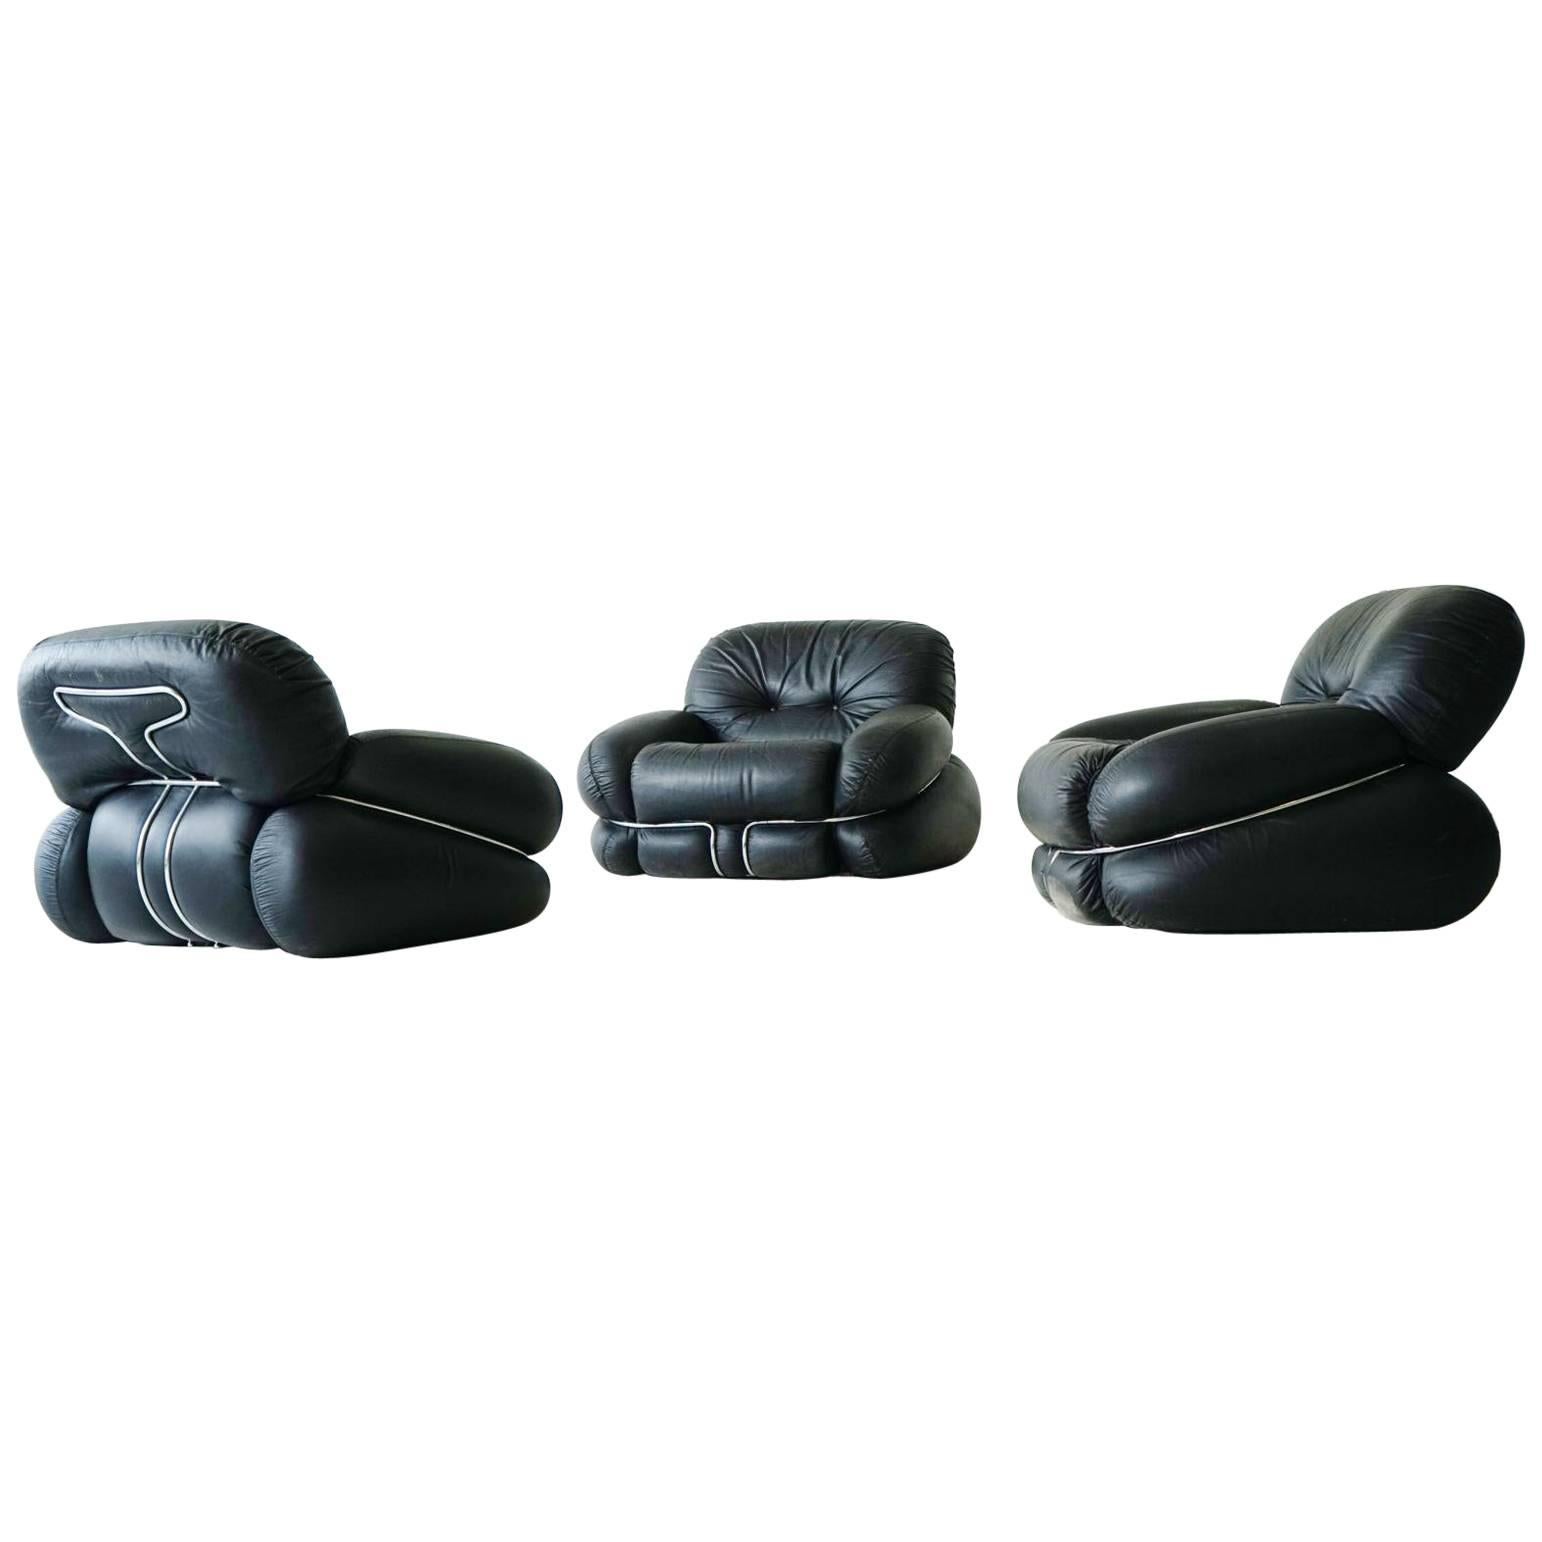 Set of Italian Leather Lounge Armchairs "Okay" by Adriano Piazzesi